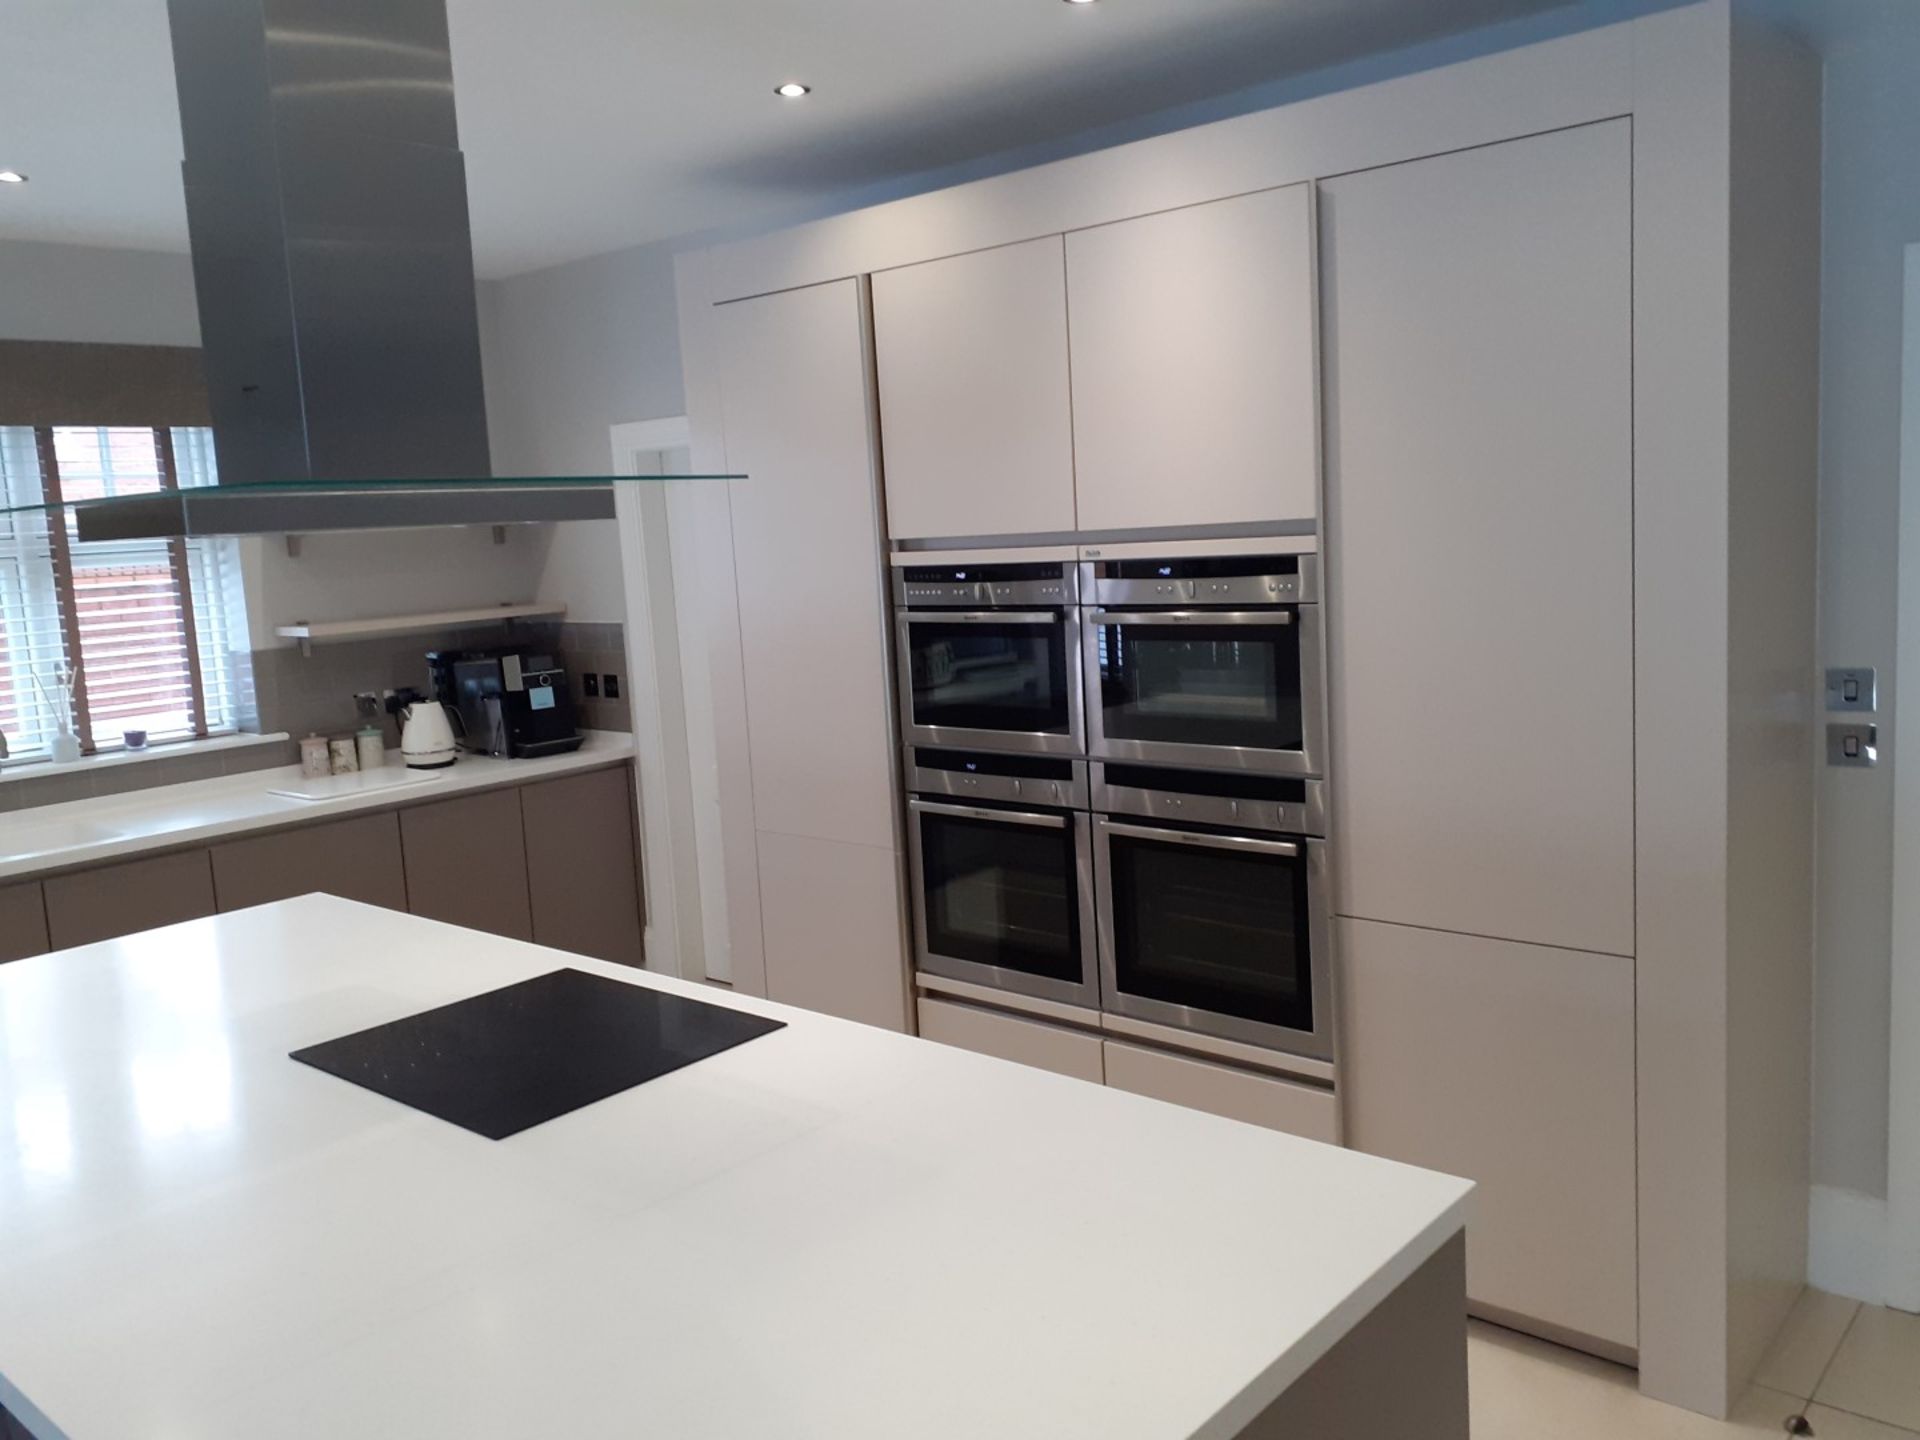 1 x SieMatic Handleless Fitted Kitchen With Intergrated NEFF Appliances, Corian Worktops And Island - Image 5 of 92